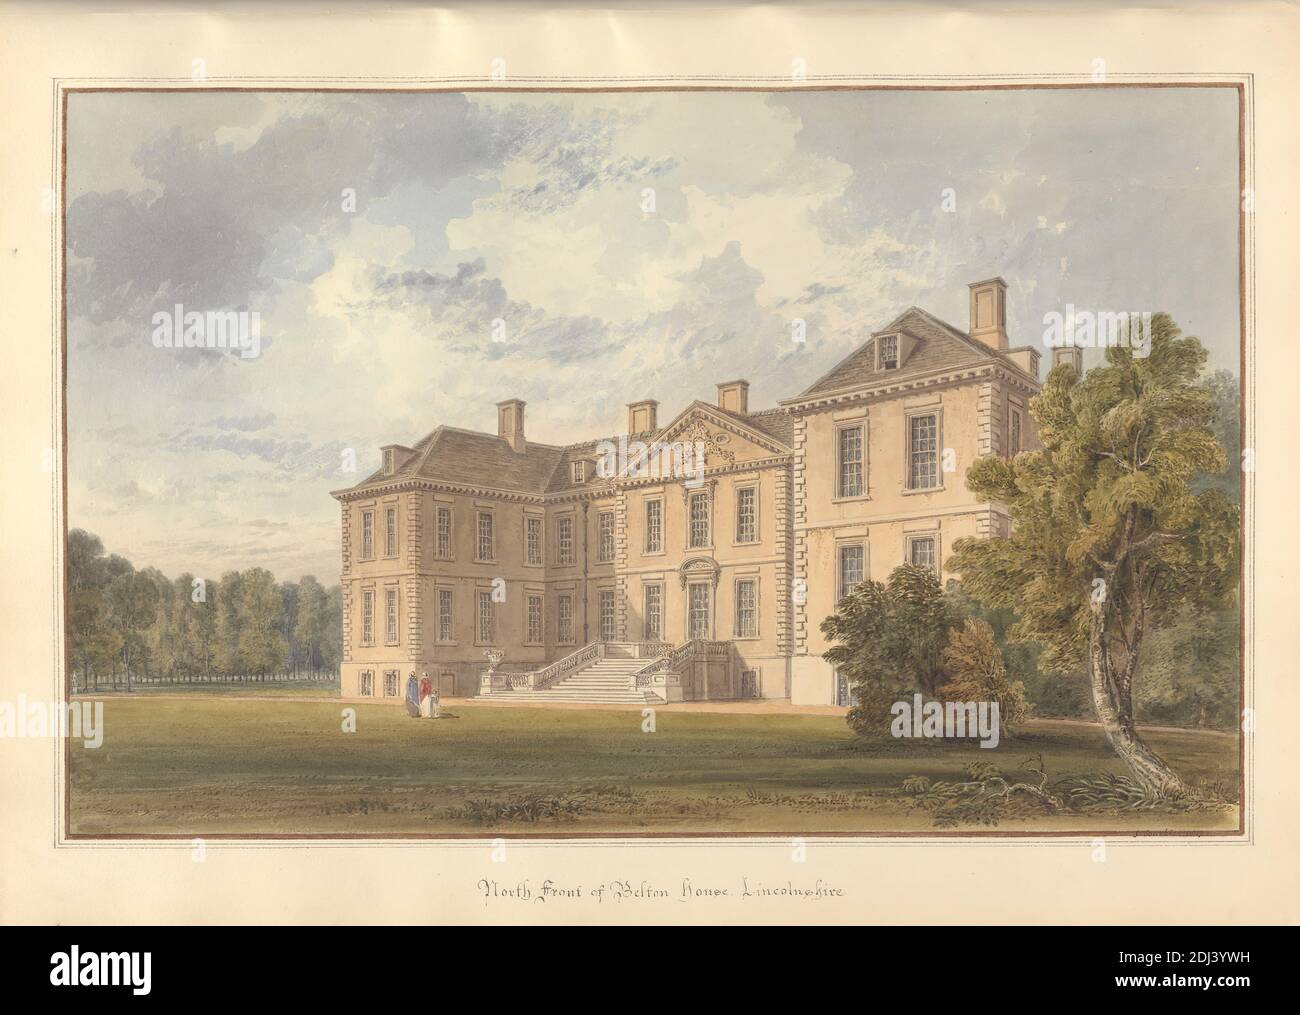 North Front of Belton house Lincolnshire, John Buckler FSA, 1770–1851, British, and John Chessell Buckler, 1793–1894, British, 1817, Watercolor and pen and black ink on moderately thick, cream wove paper, Sheet: 14 × 19 3/4 inches (35.6 × 50.2 cm) and Image: 11 3/8 × 17 3/4 inches (28.9 × 45.1 cm), architectural subject, Carolean, chimneys, country house, mansard roof, mullions, pediment, windows, Belton, England, Europe, North Lincolnshire, United Kingdom Stock Photo